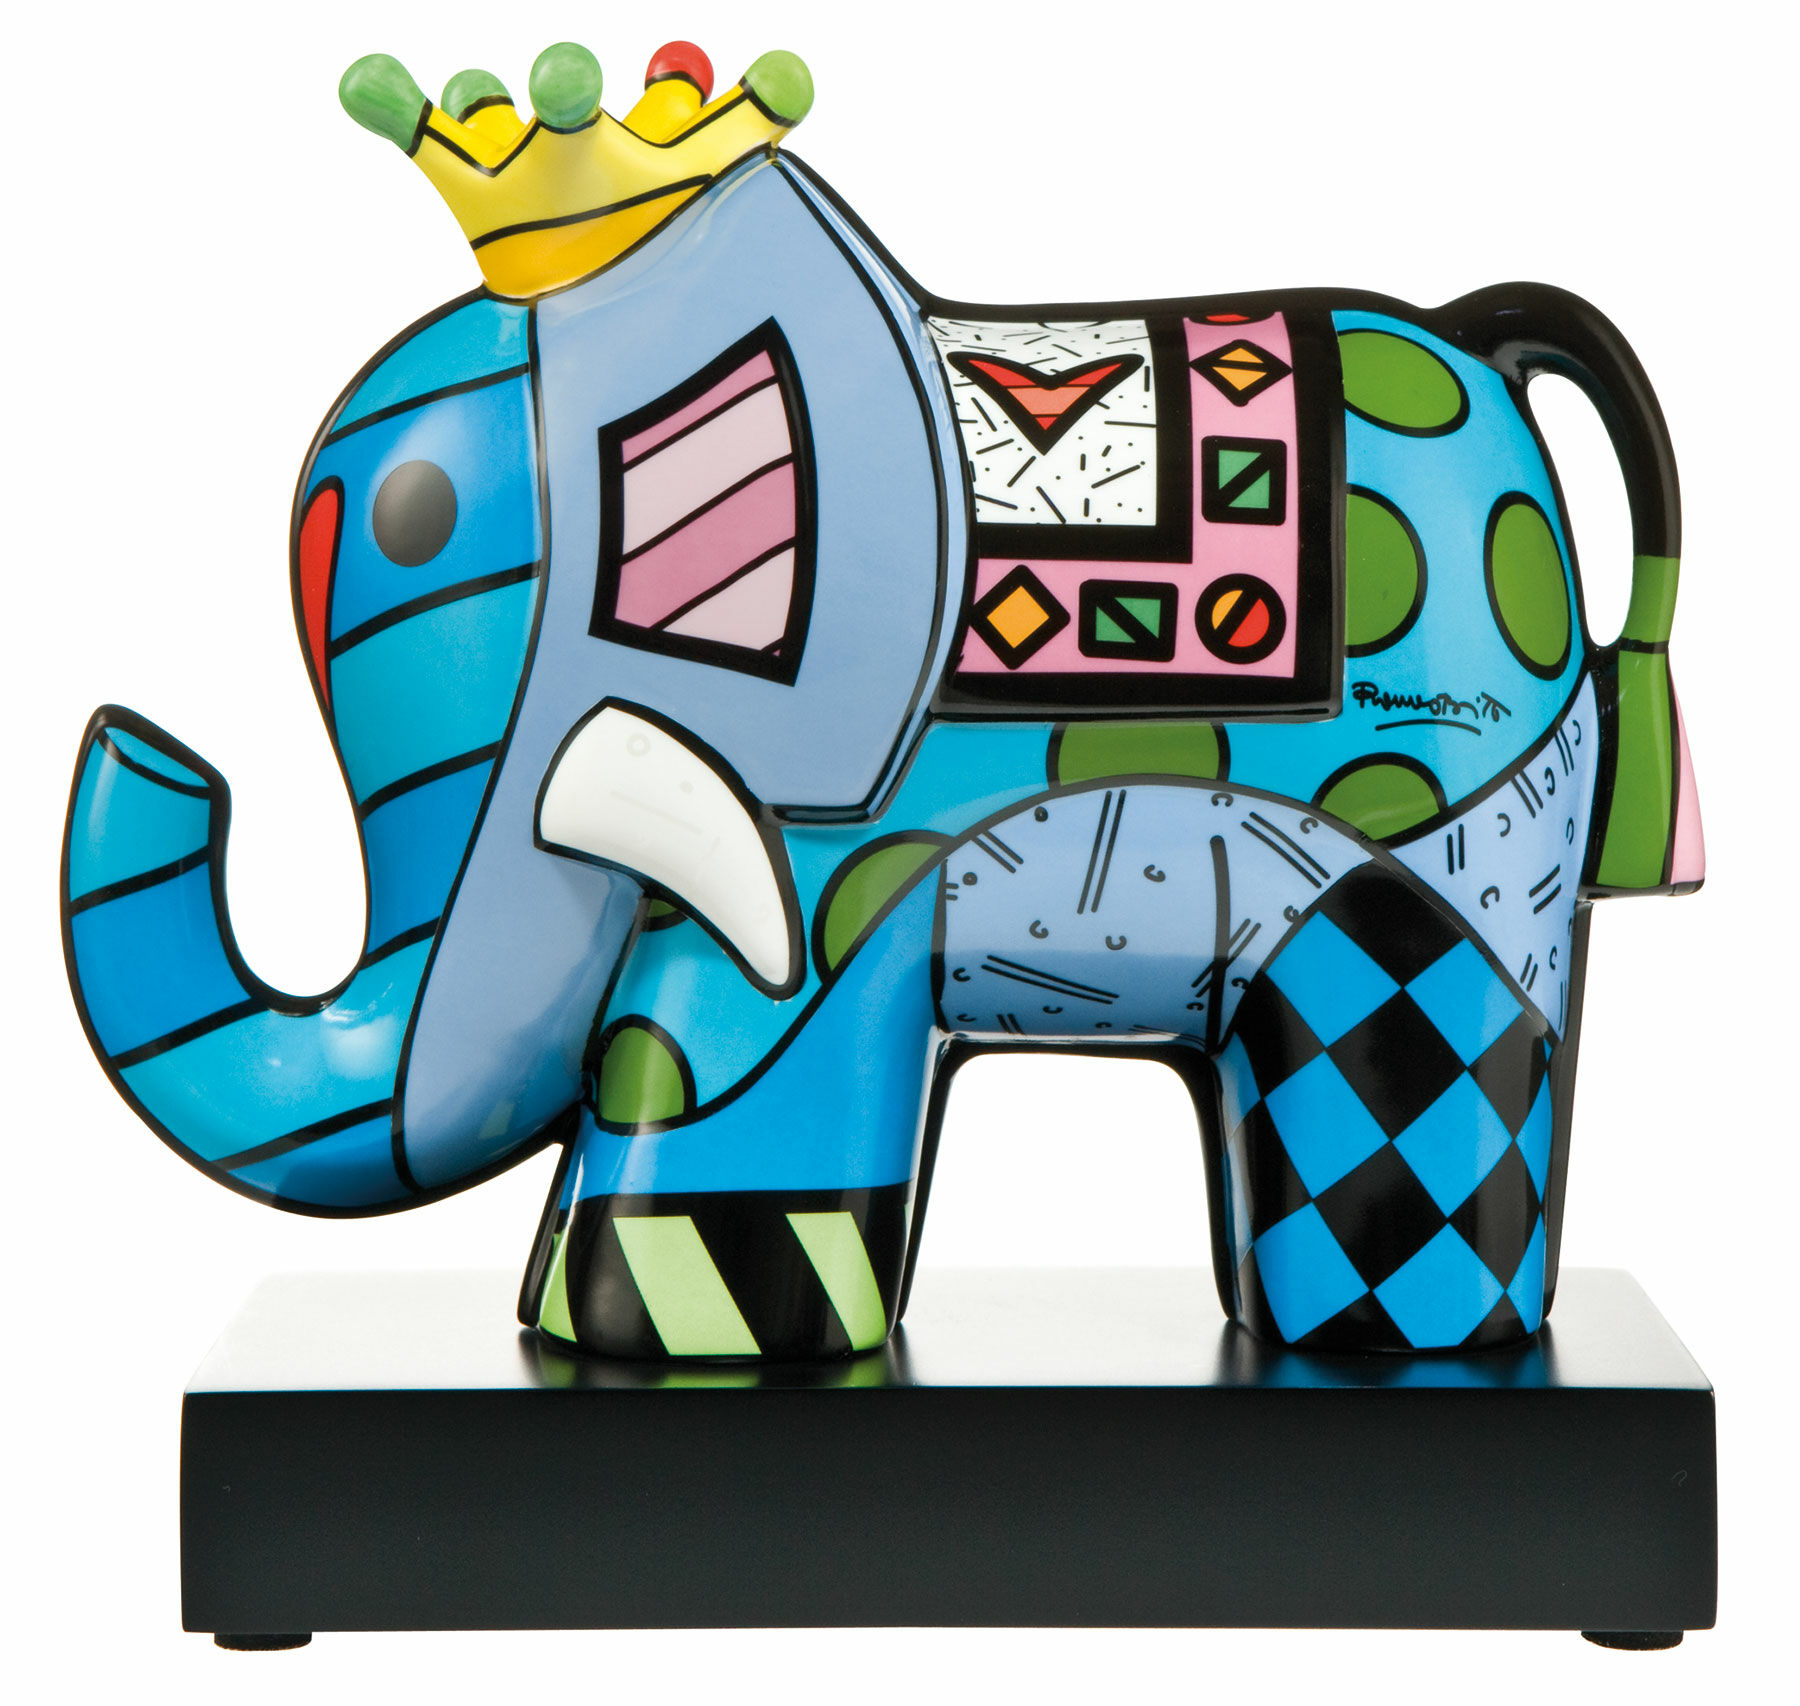 Porcelain sculpture "Great India III" by Romero Britto